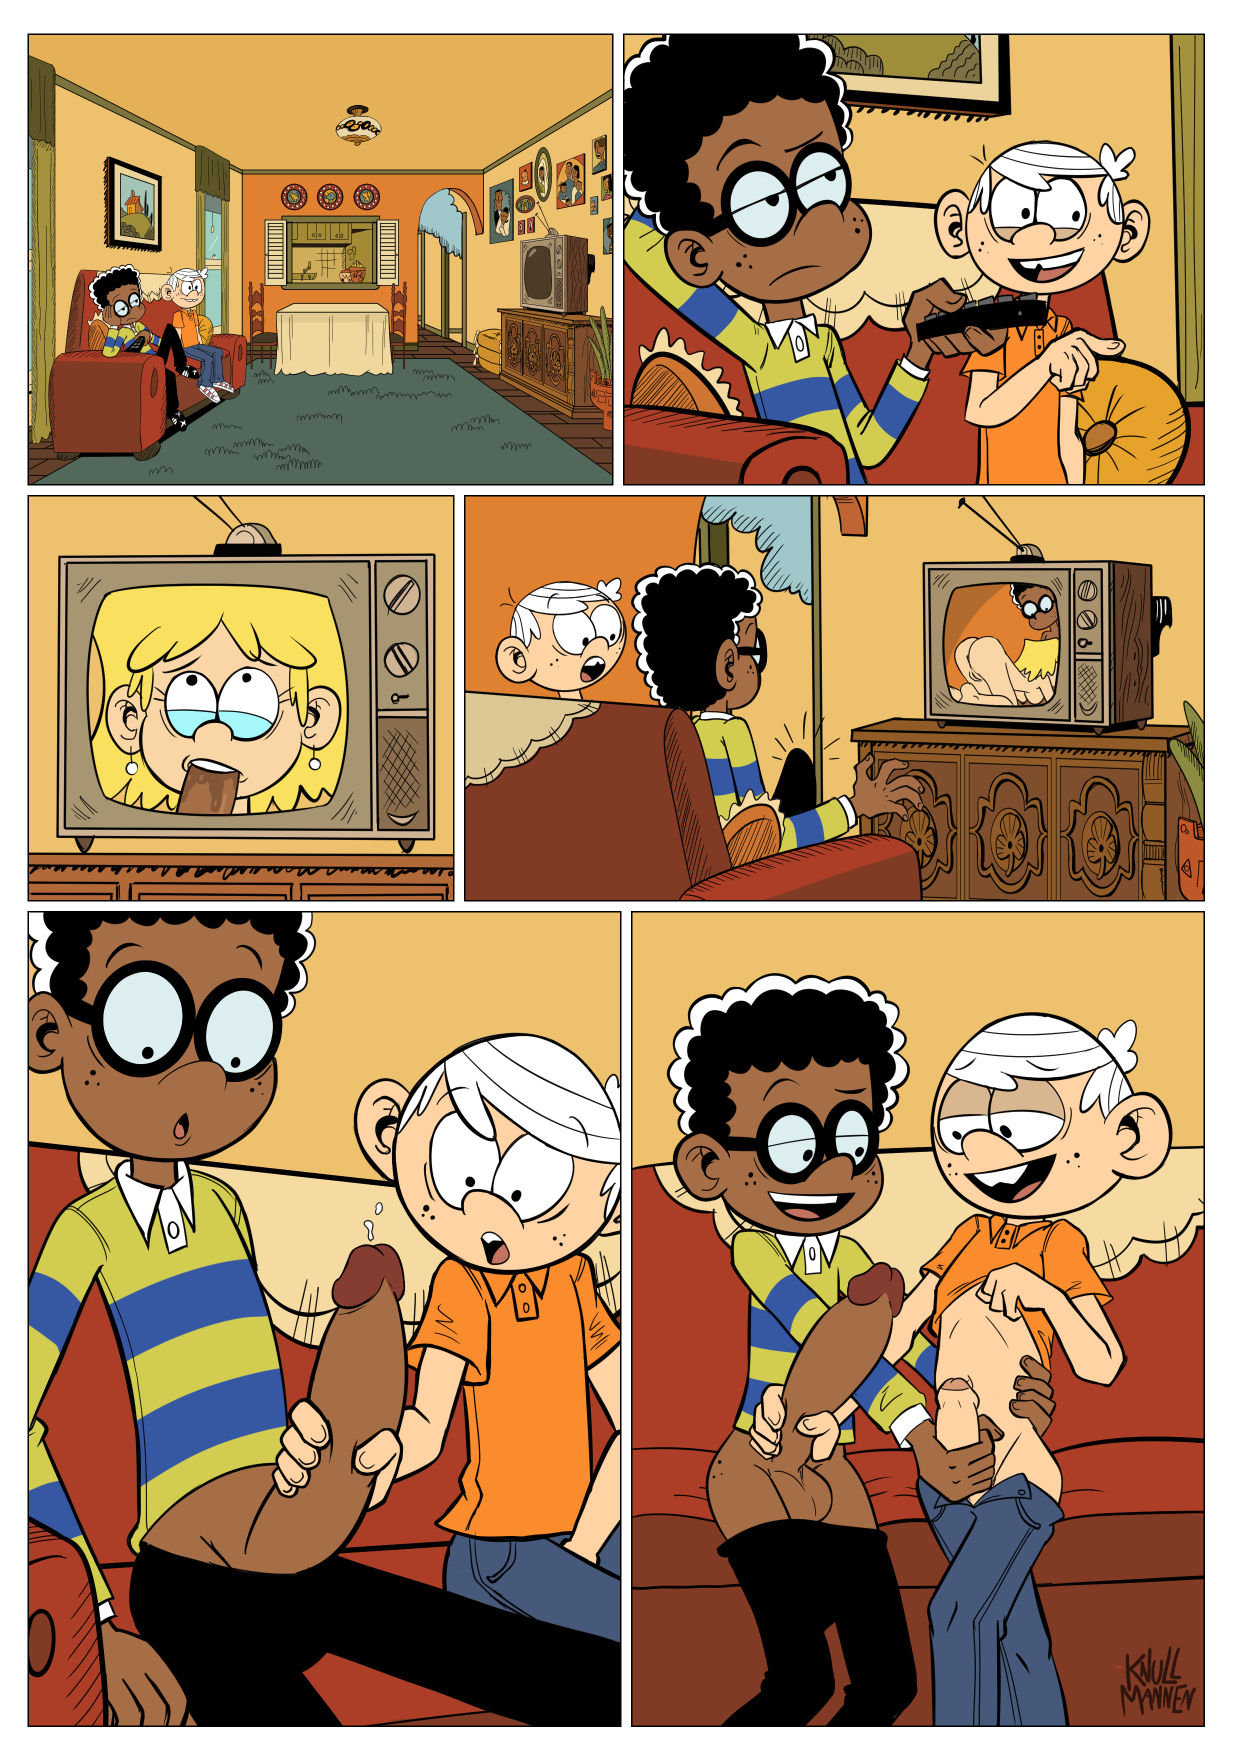 [knullmannen] Bromance In The Big House The Loud House Porn Comics Galleries